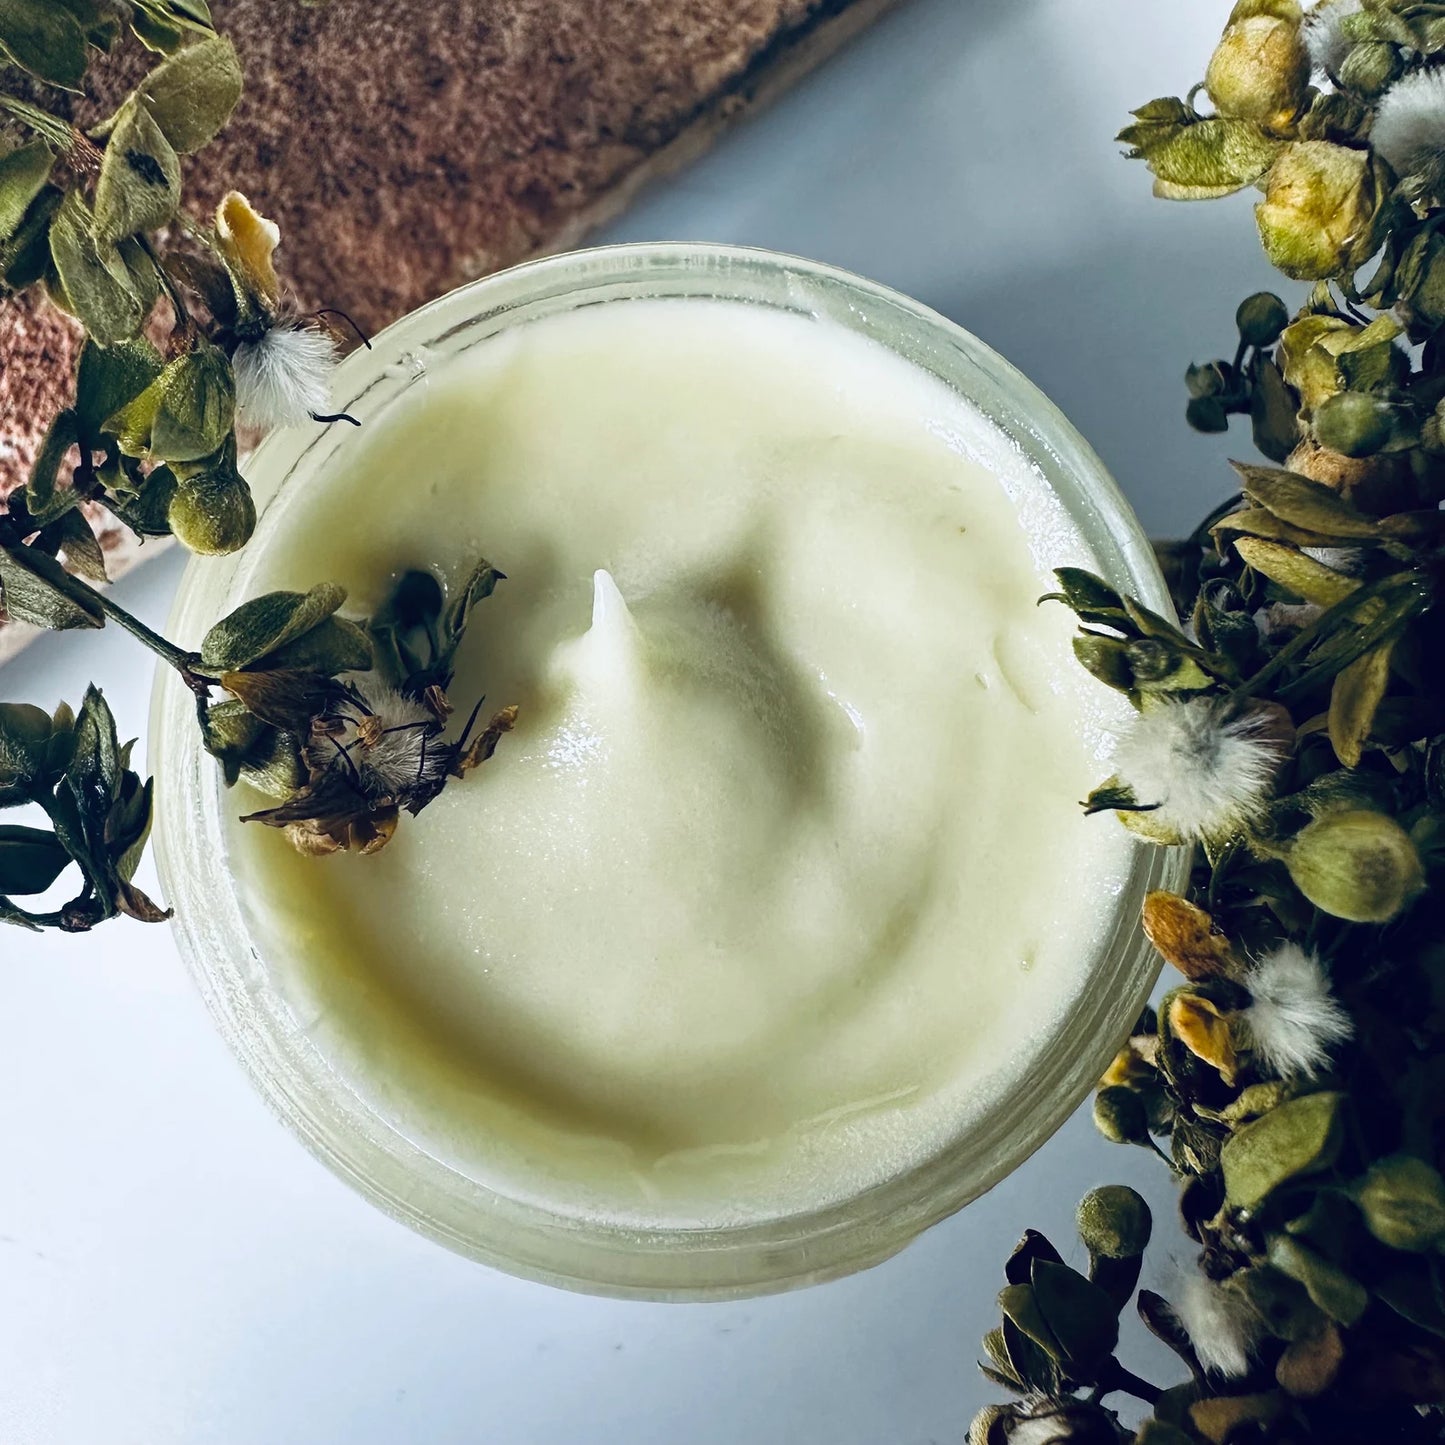 CREOSOTE BODY BUTTER